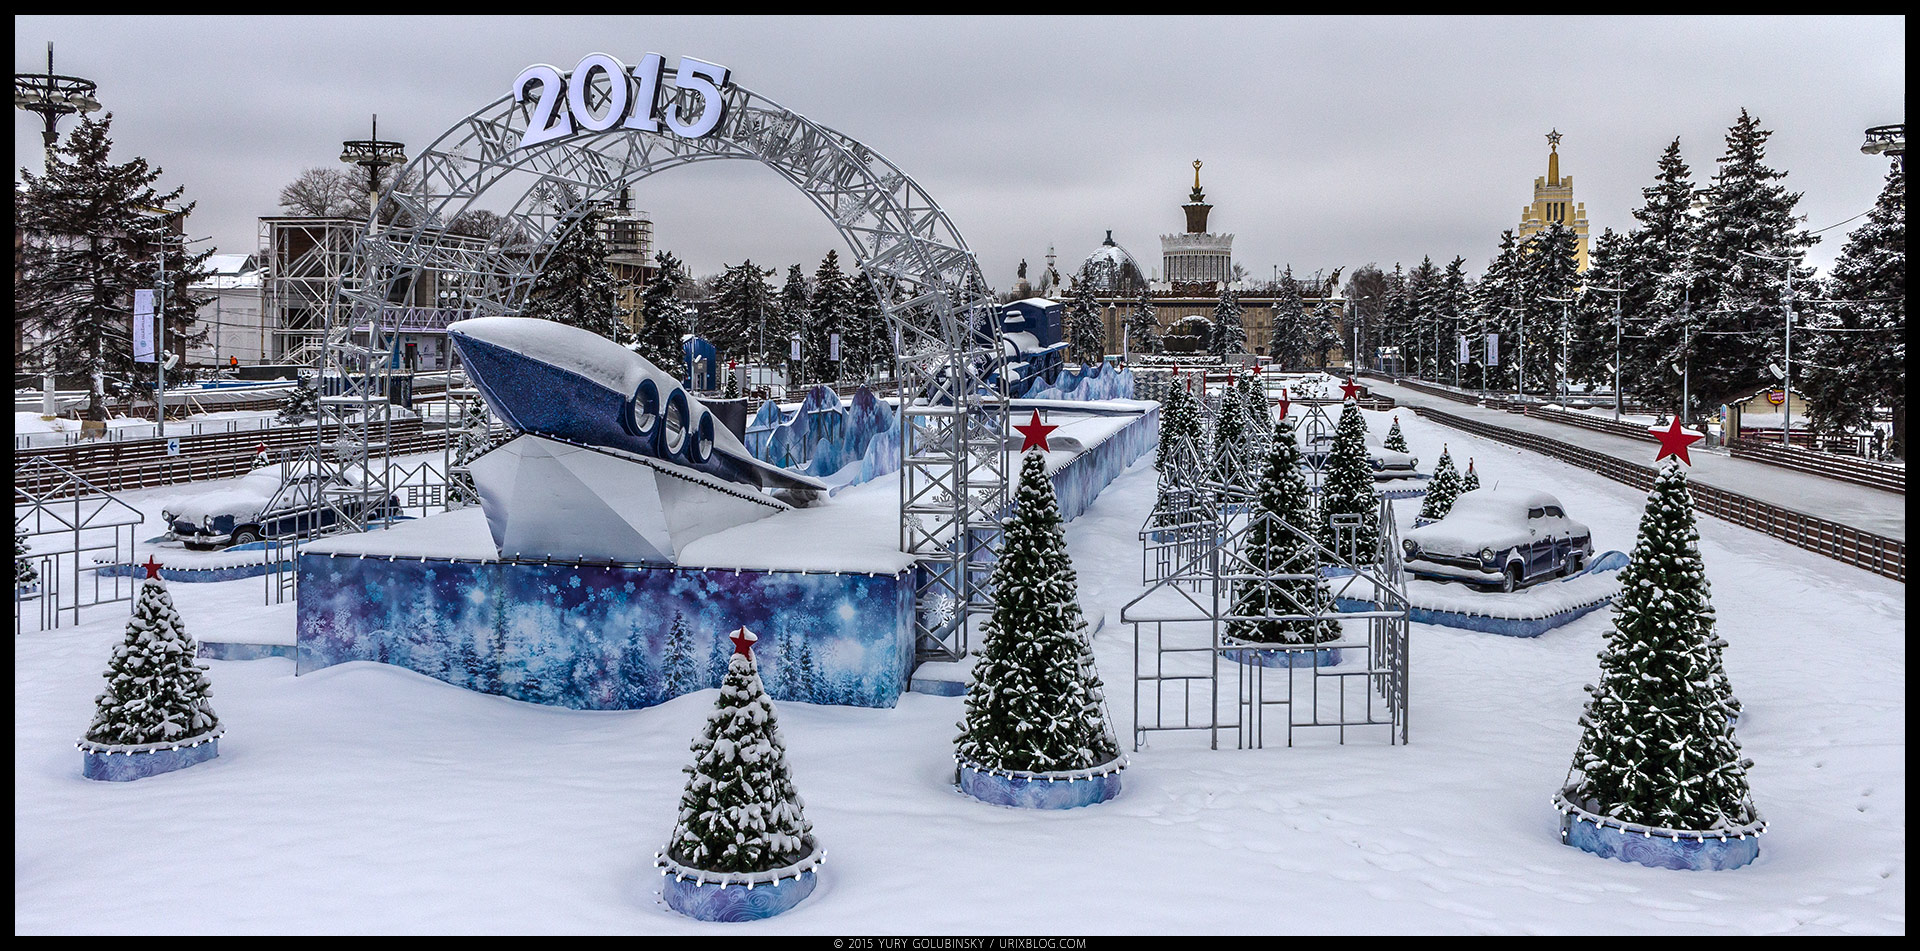 Ice skating rink, VDNKh, park, ice, snow, winter, soviet, rocket, architecture, Moscow, Russia, January, panorama, 2015